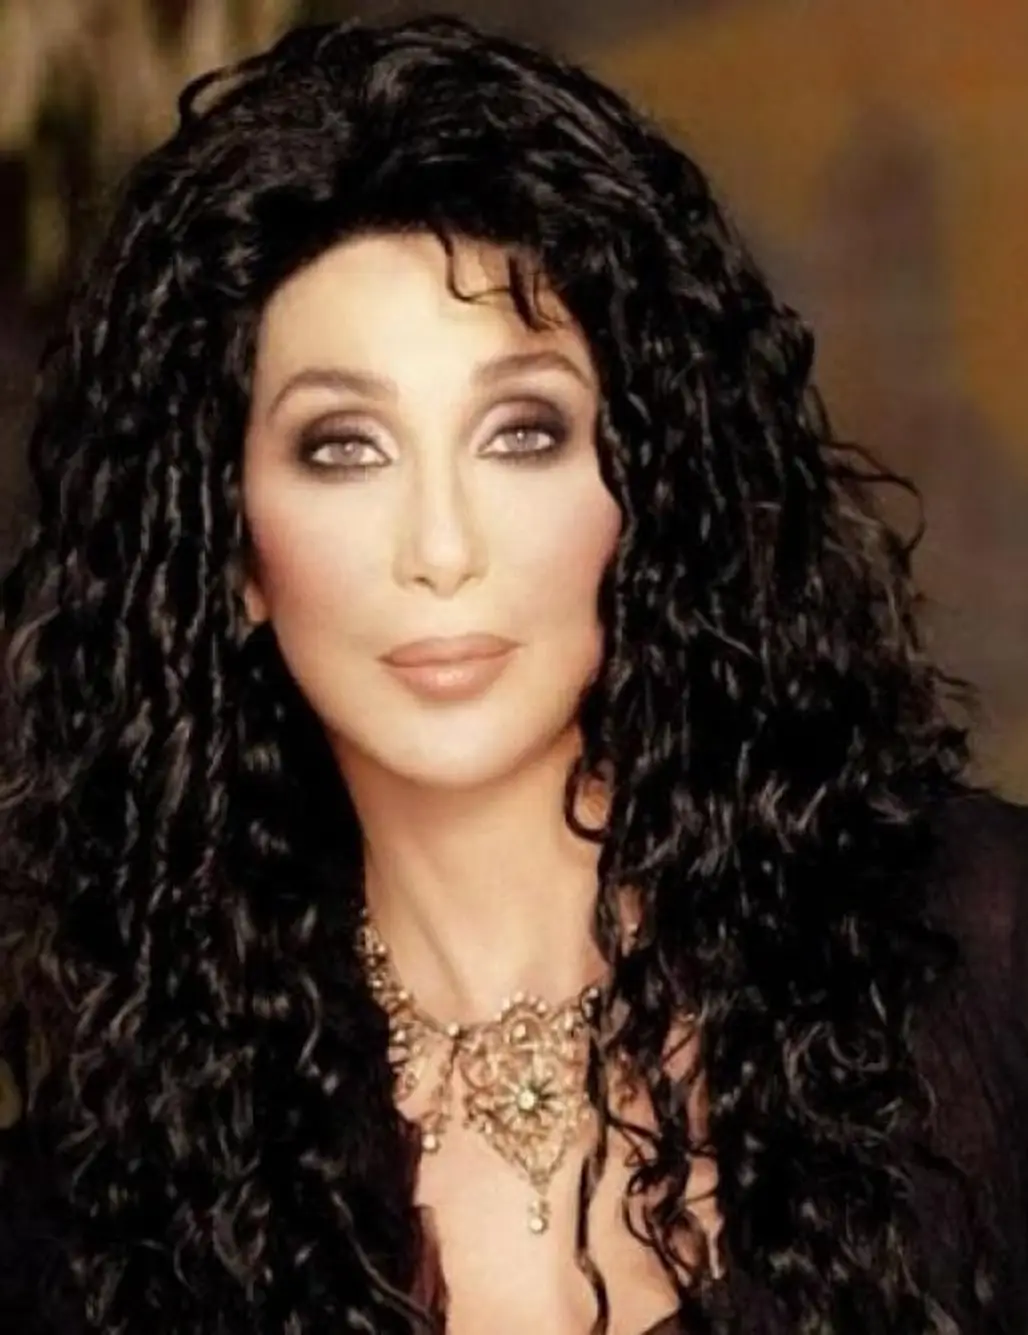 Cher, American Singer and Actress